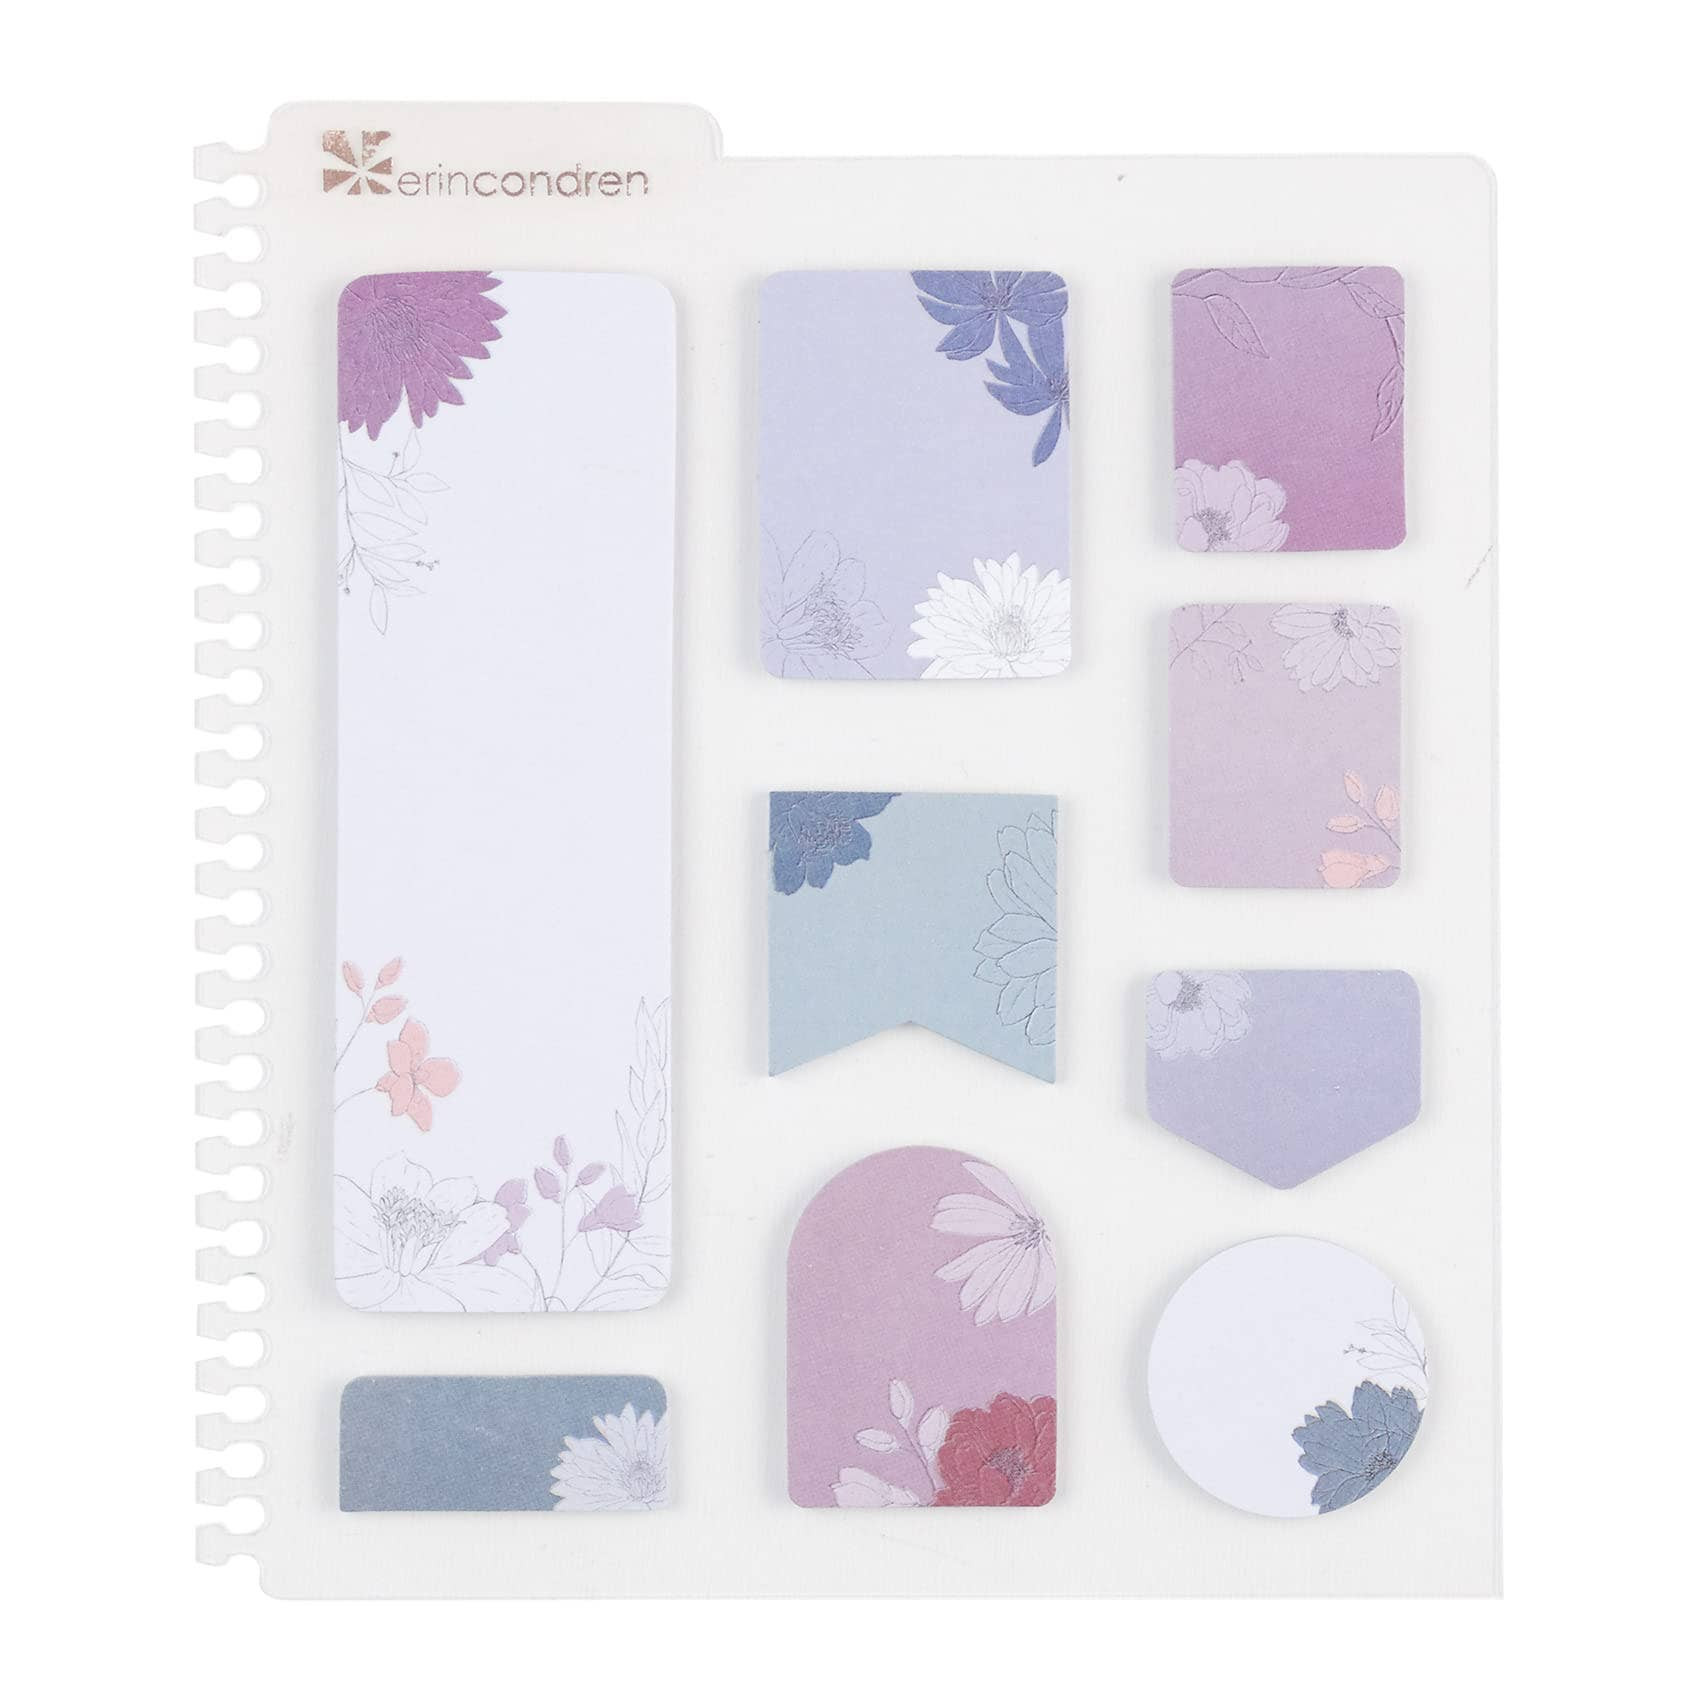 Erin Condren Universal Snap-In Stylized Sticky Notes - In Bloom